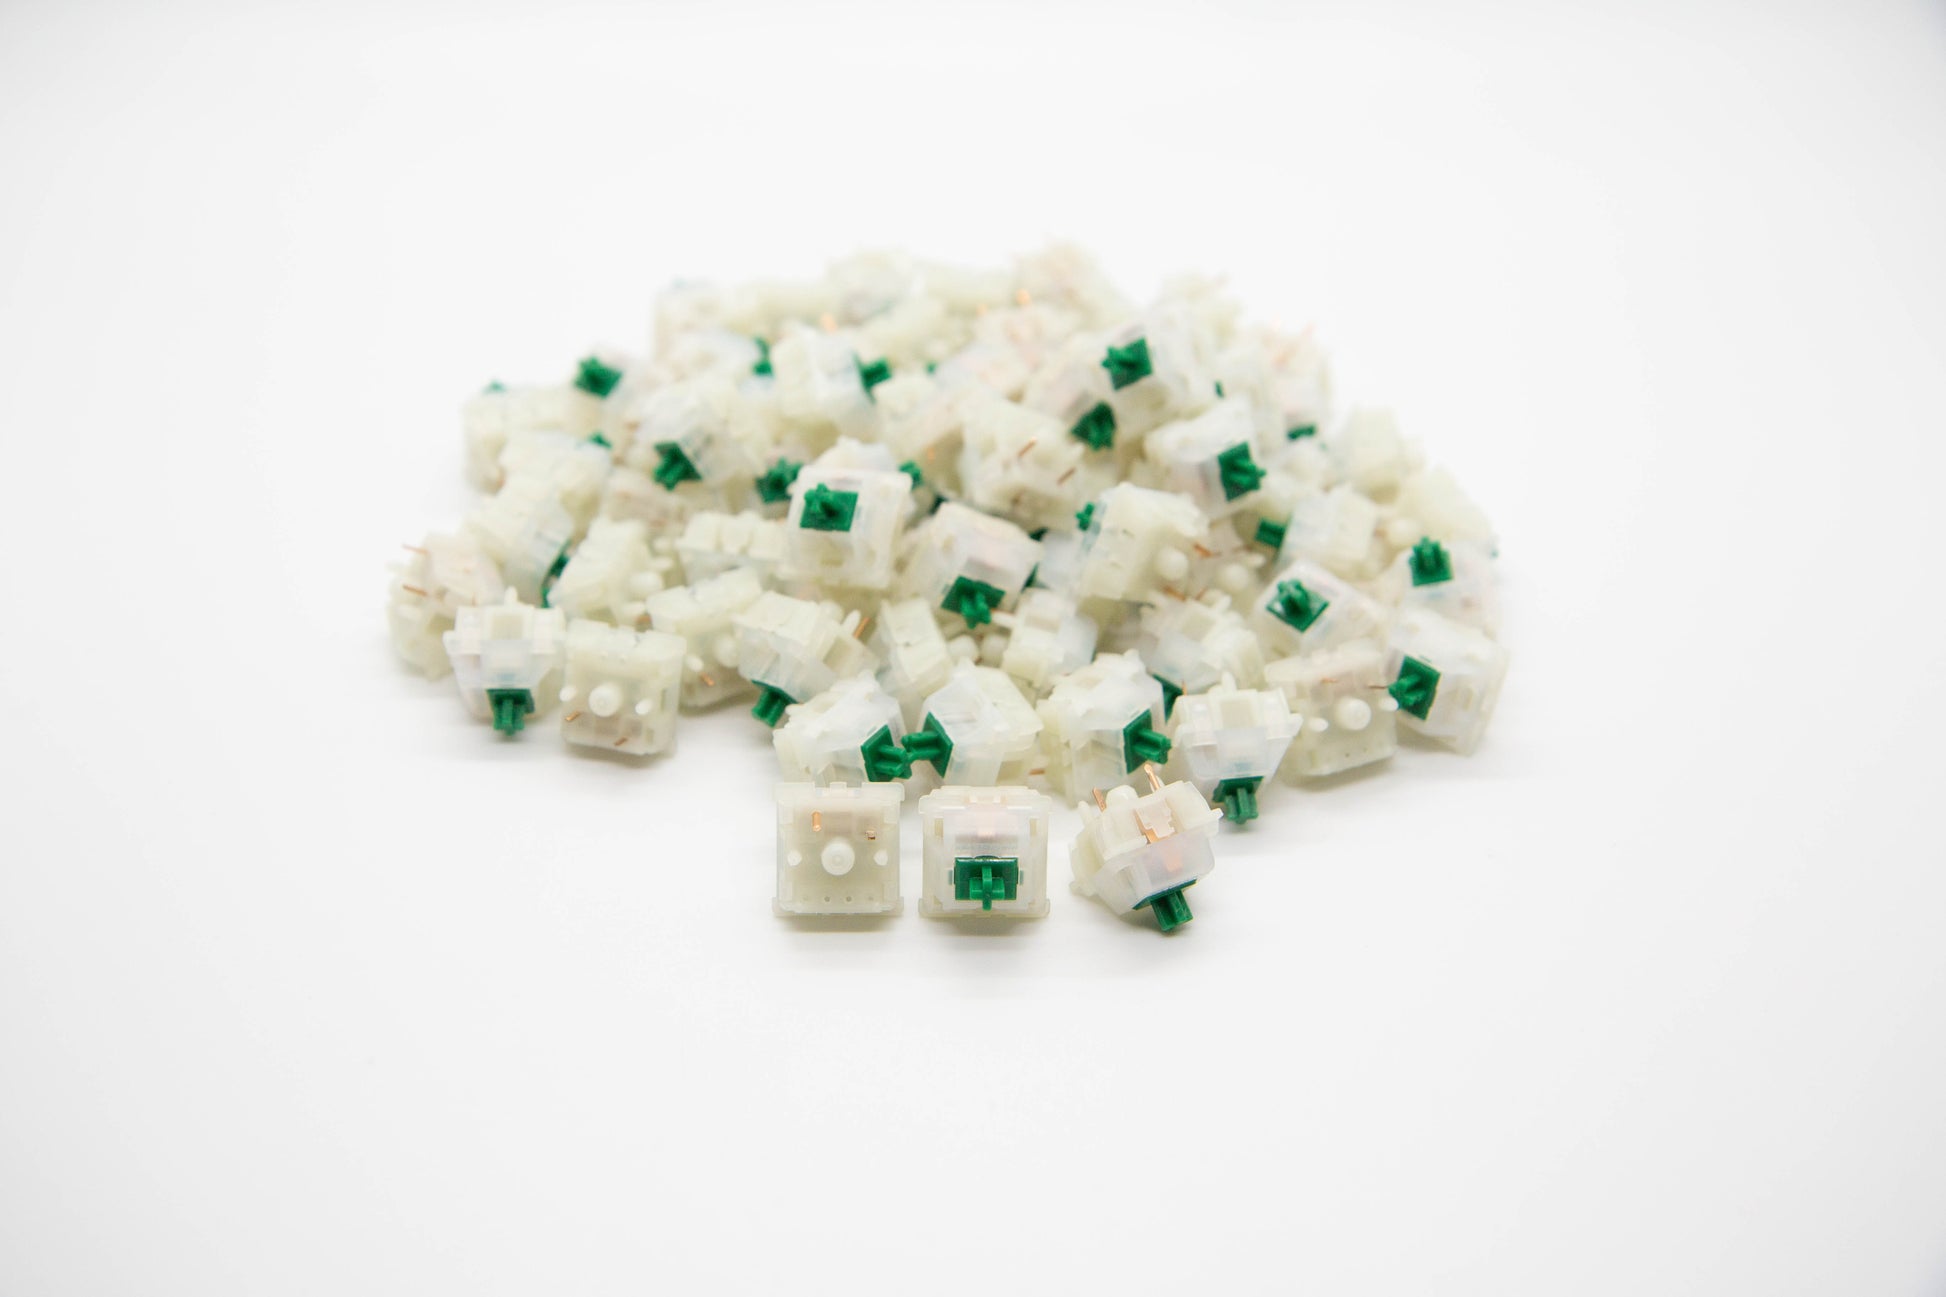 Close-up shot of a pile of Gateron Milky Green mechanical keyboard switches featuring white housing and green stems